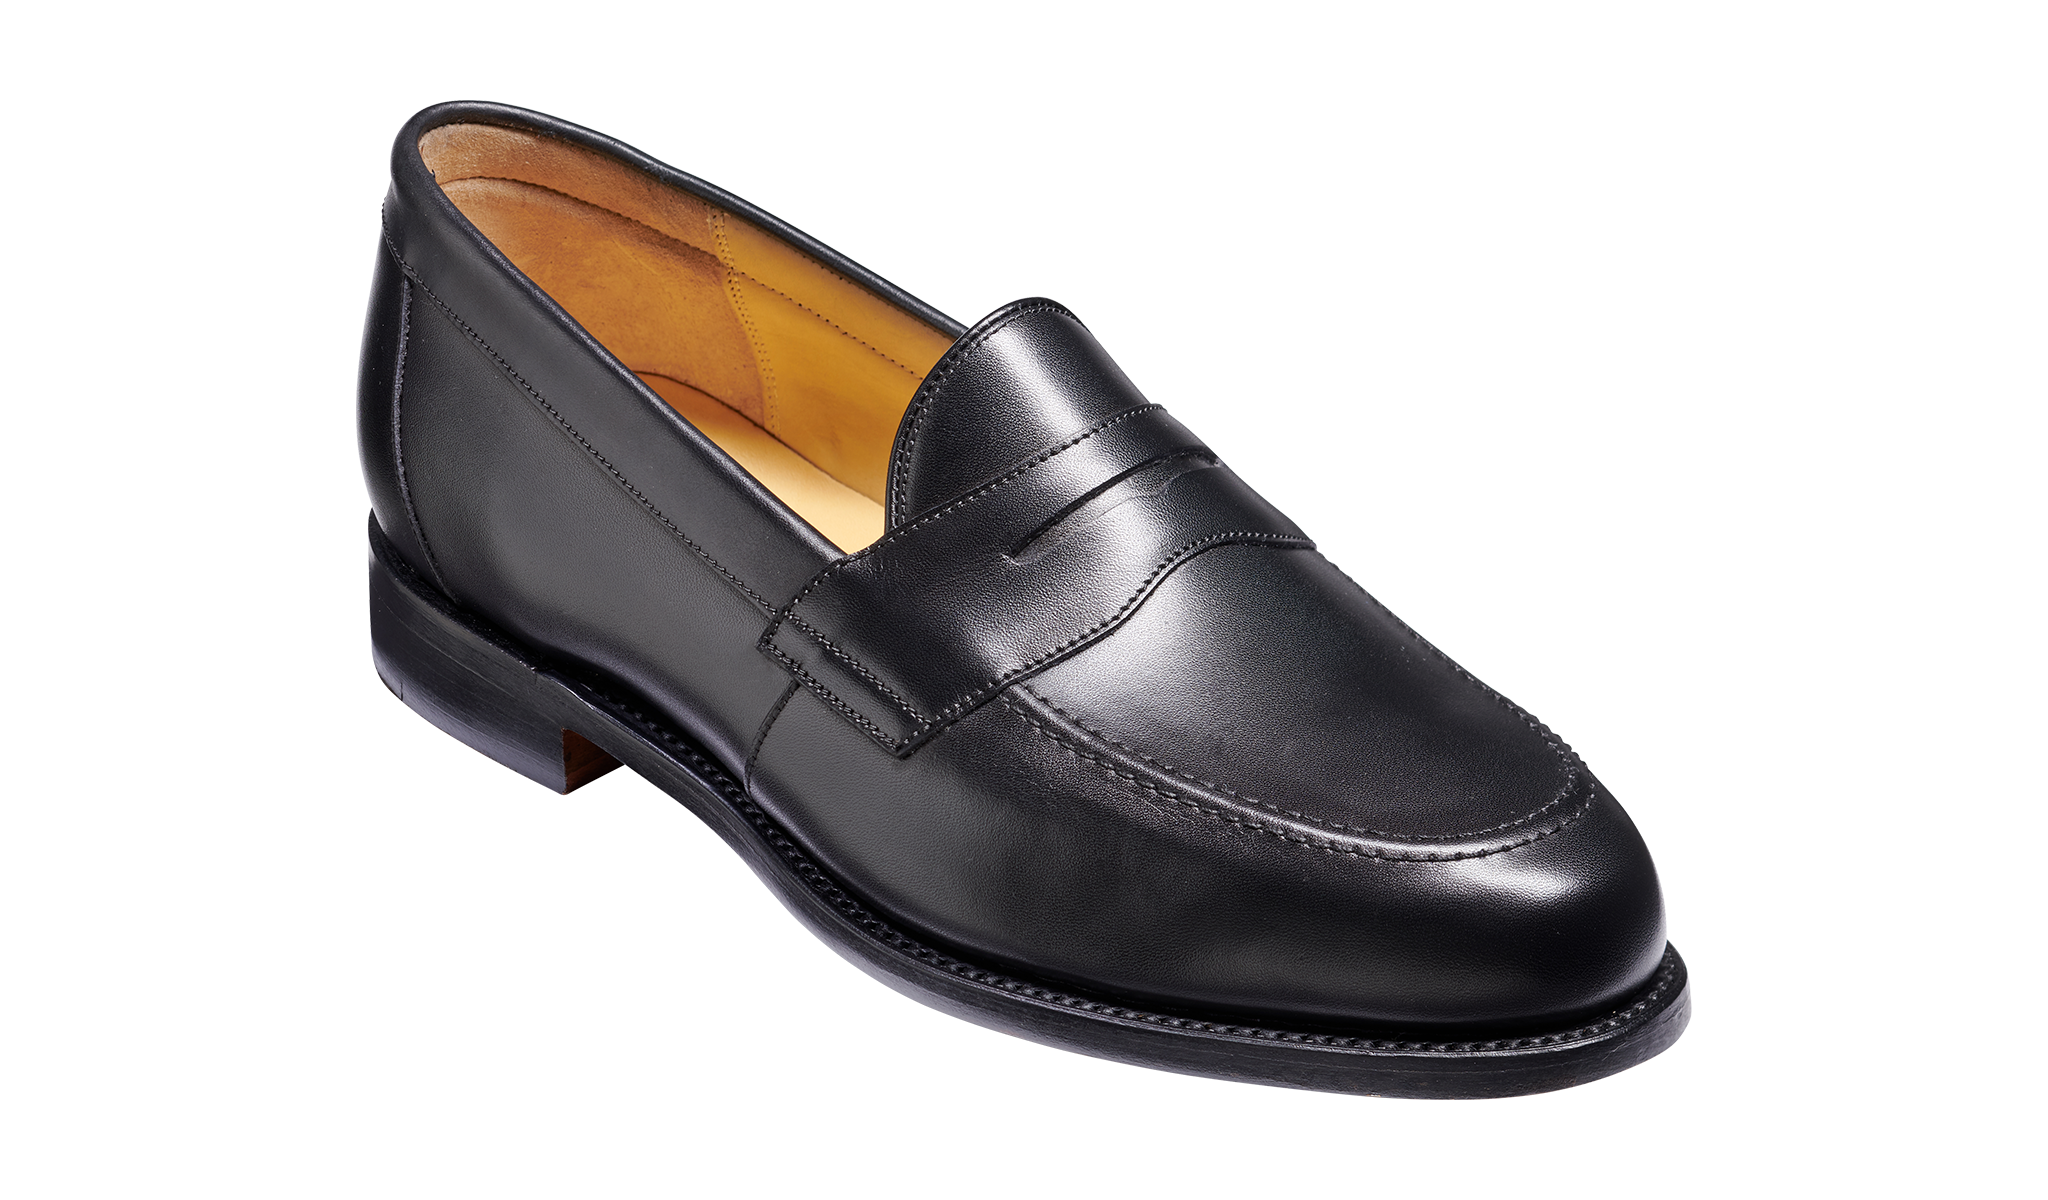 Portsmouth - A men's black loafers by Barker Shoes.